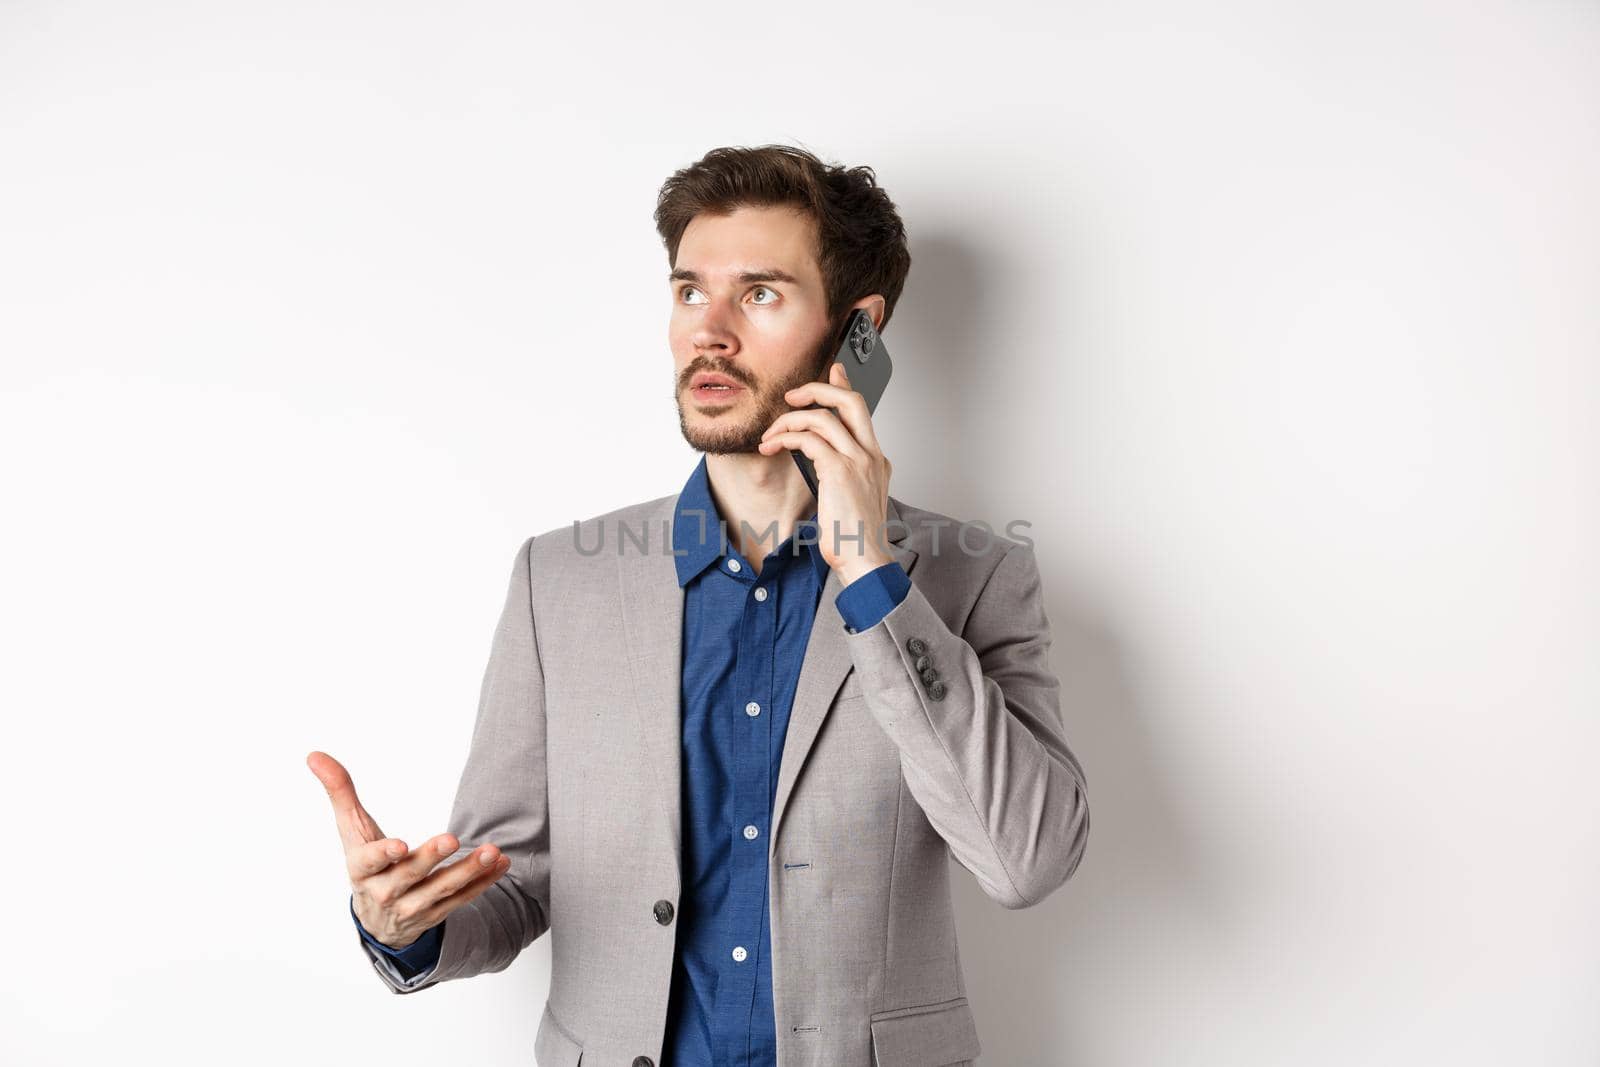 Businessman making phone call, talking on smartphone and looking busy, wearing suit, white background.